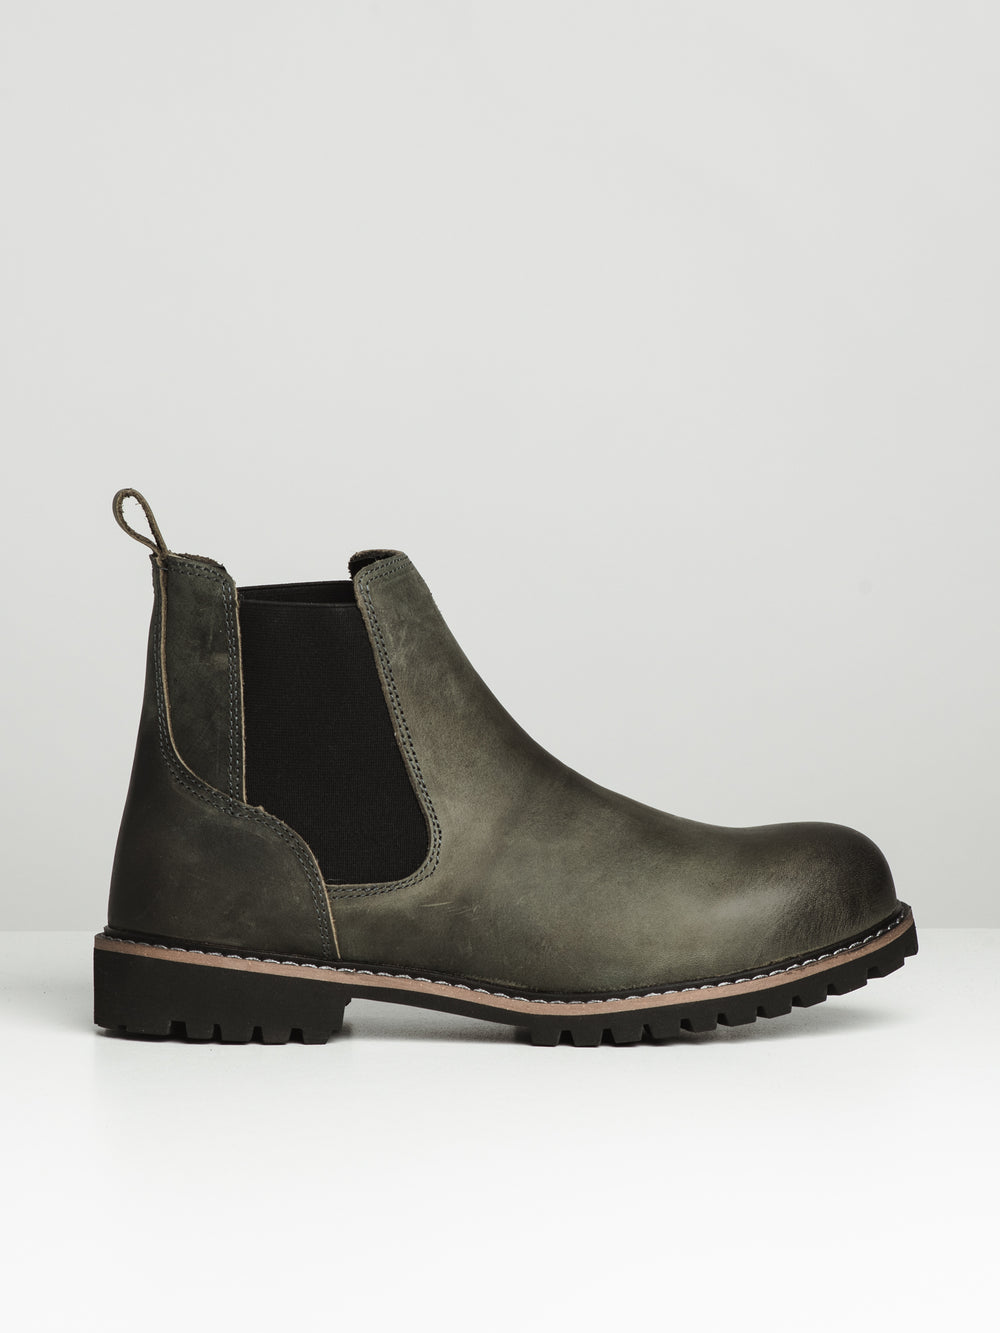 MENS FURROW LAWSON BOOTS - CLEARANCE